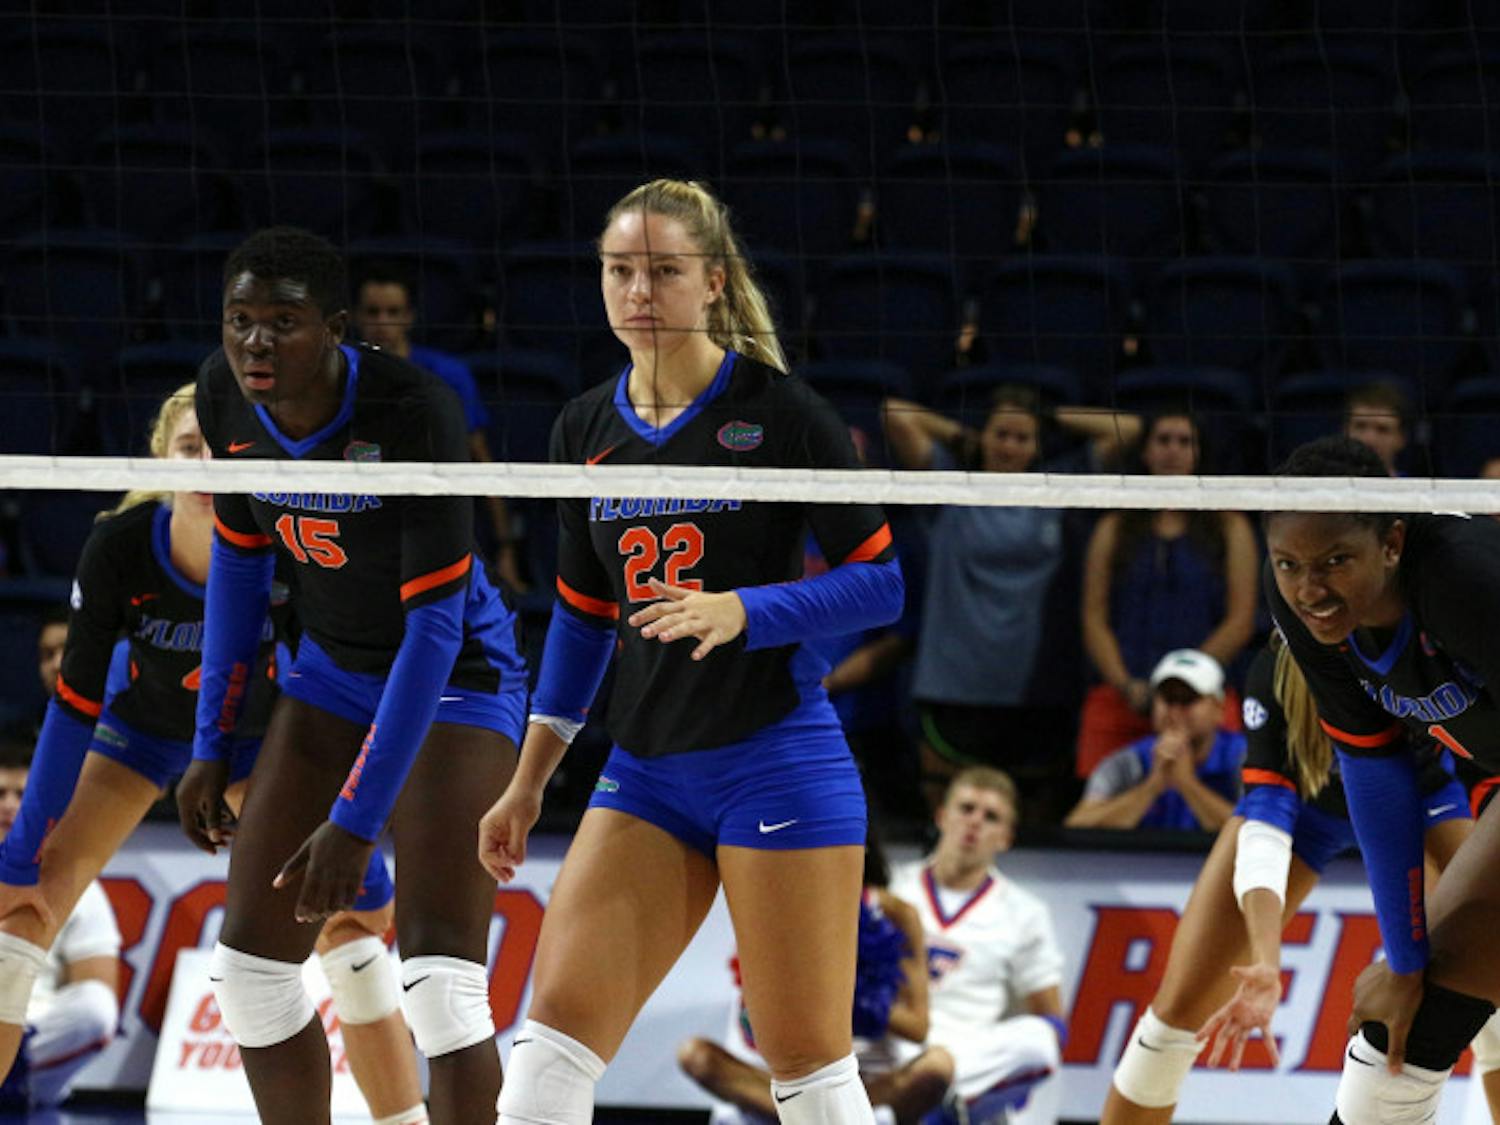 Redshirt senior setter Allie Monserez will be a leader for the Gators this year. Her sister, Marlie, joins her on the team this season.